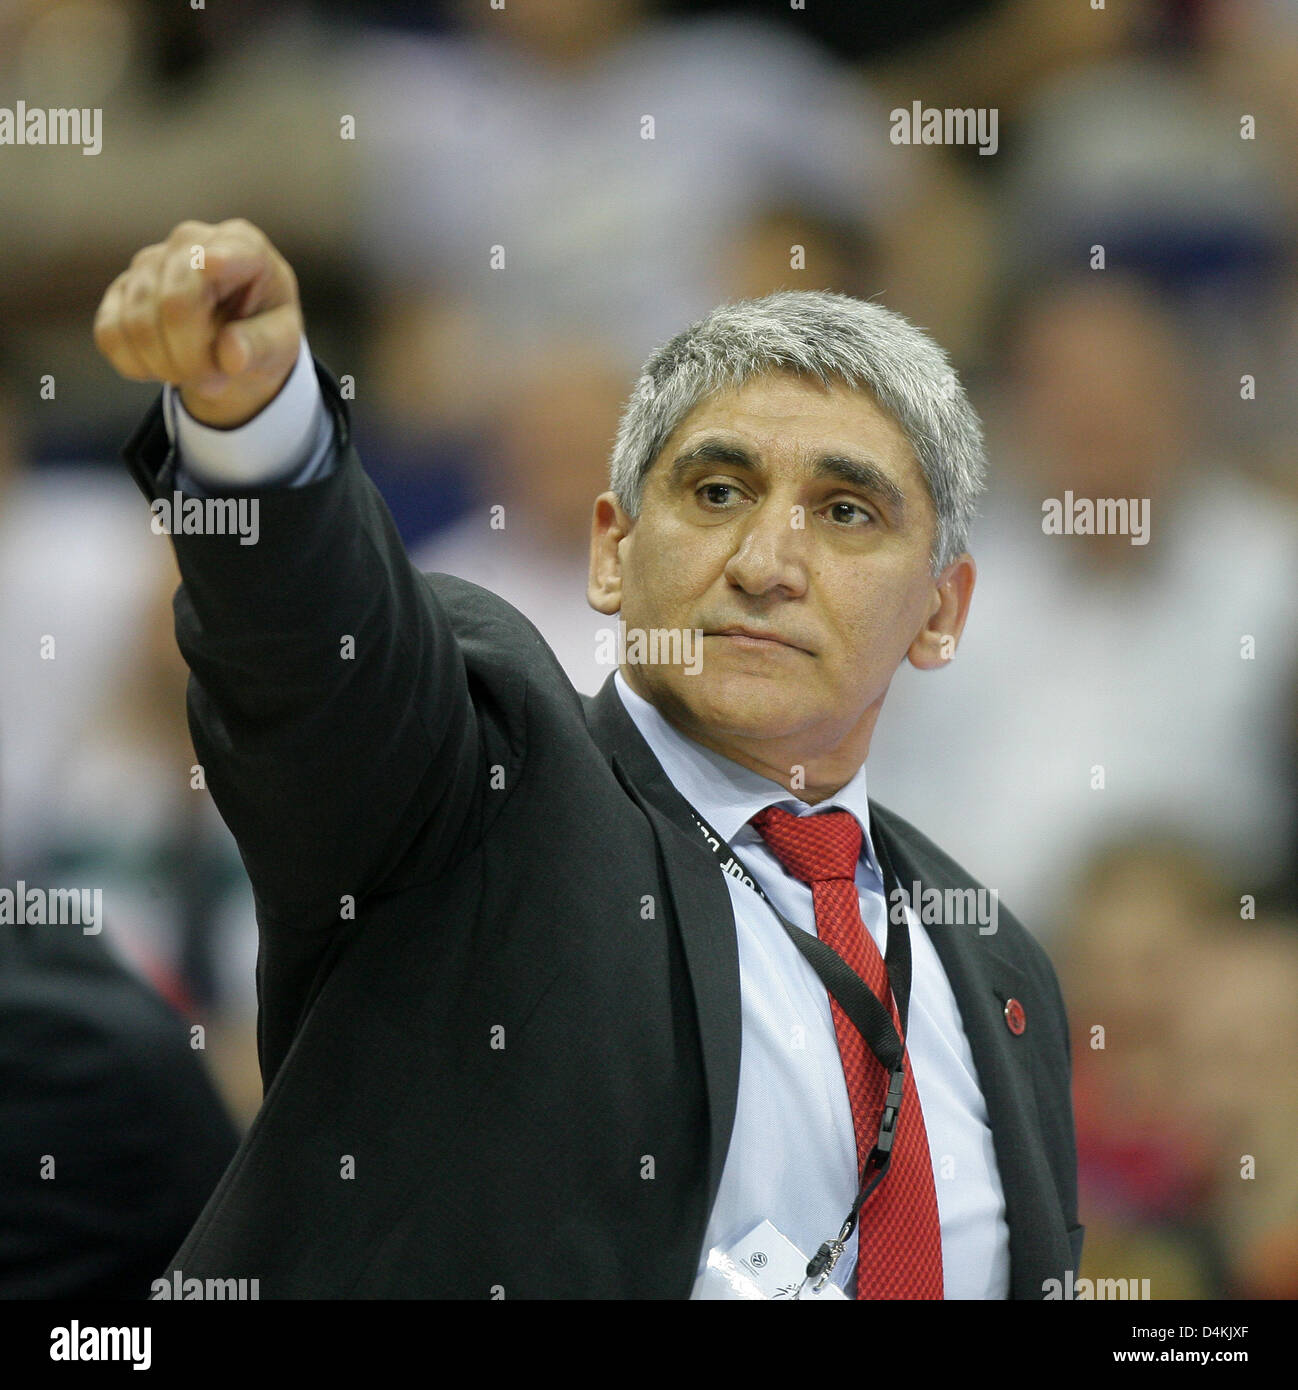 Head coach Giannakis Panagiotis of Olympiacos Piraeus gestures at the touch line during the Basketball EuroLeague semi final Olympiacos Piraeus vs Panathinaikos Athens at ?O2-World? arena in Berlin, Germany, 1 May 2009. Photo: Jens Wolf Stock Photo